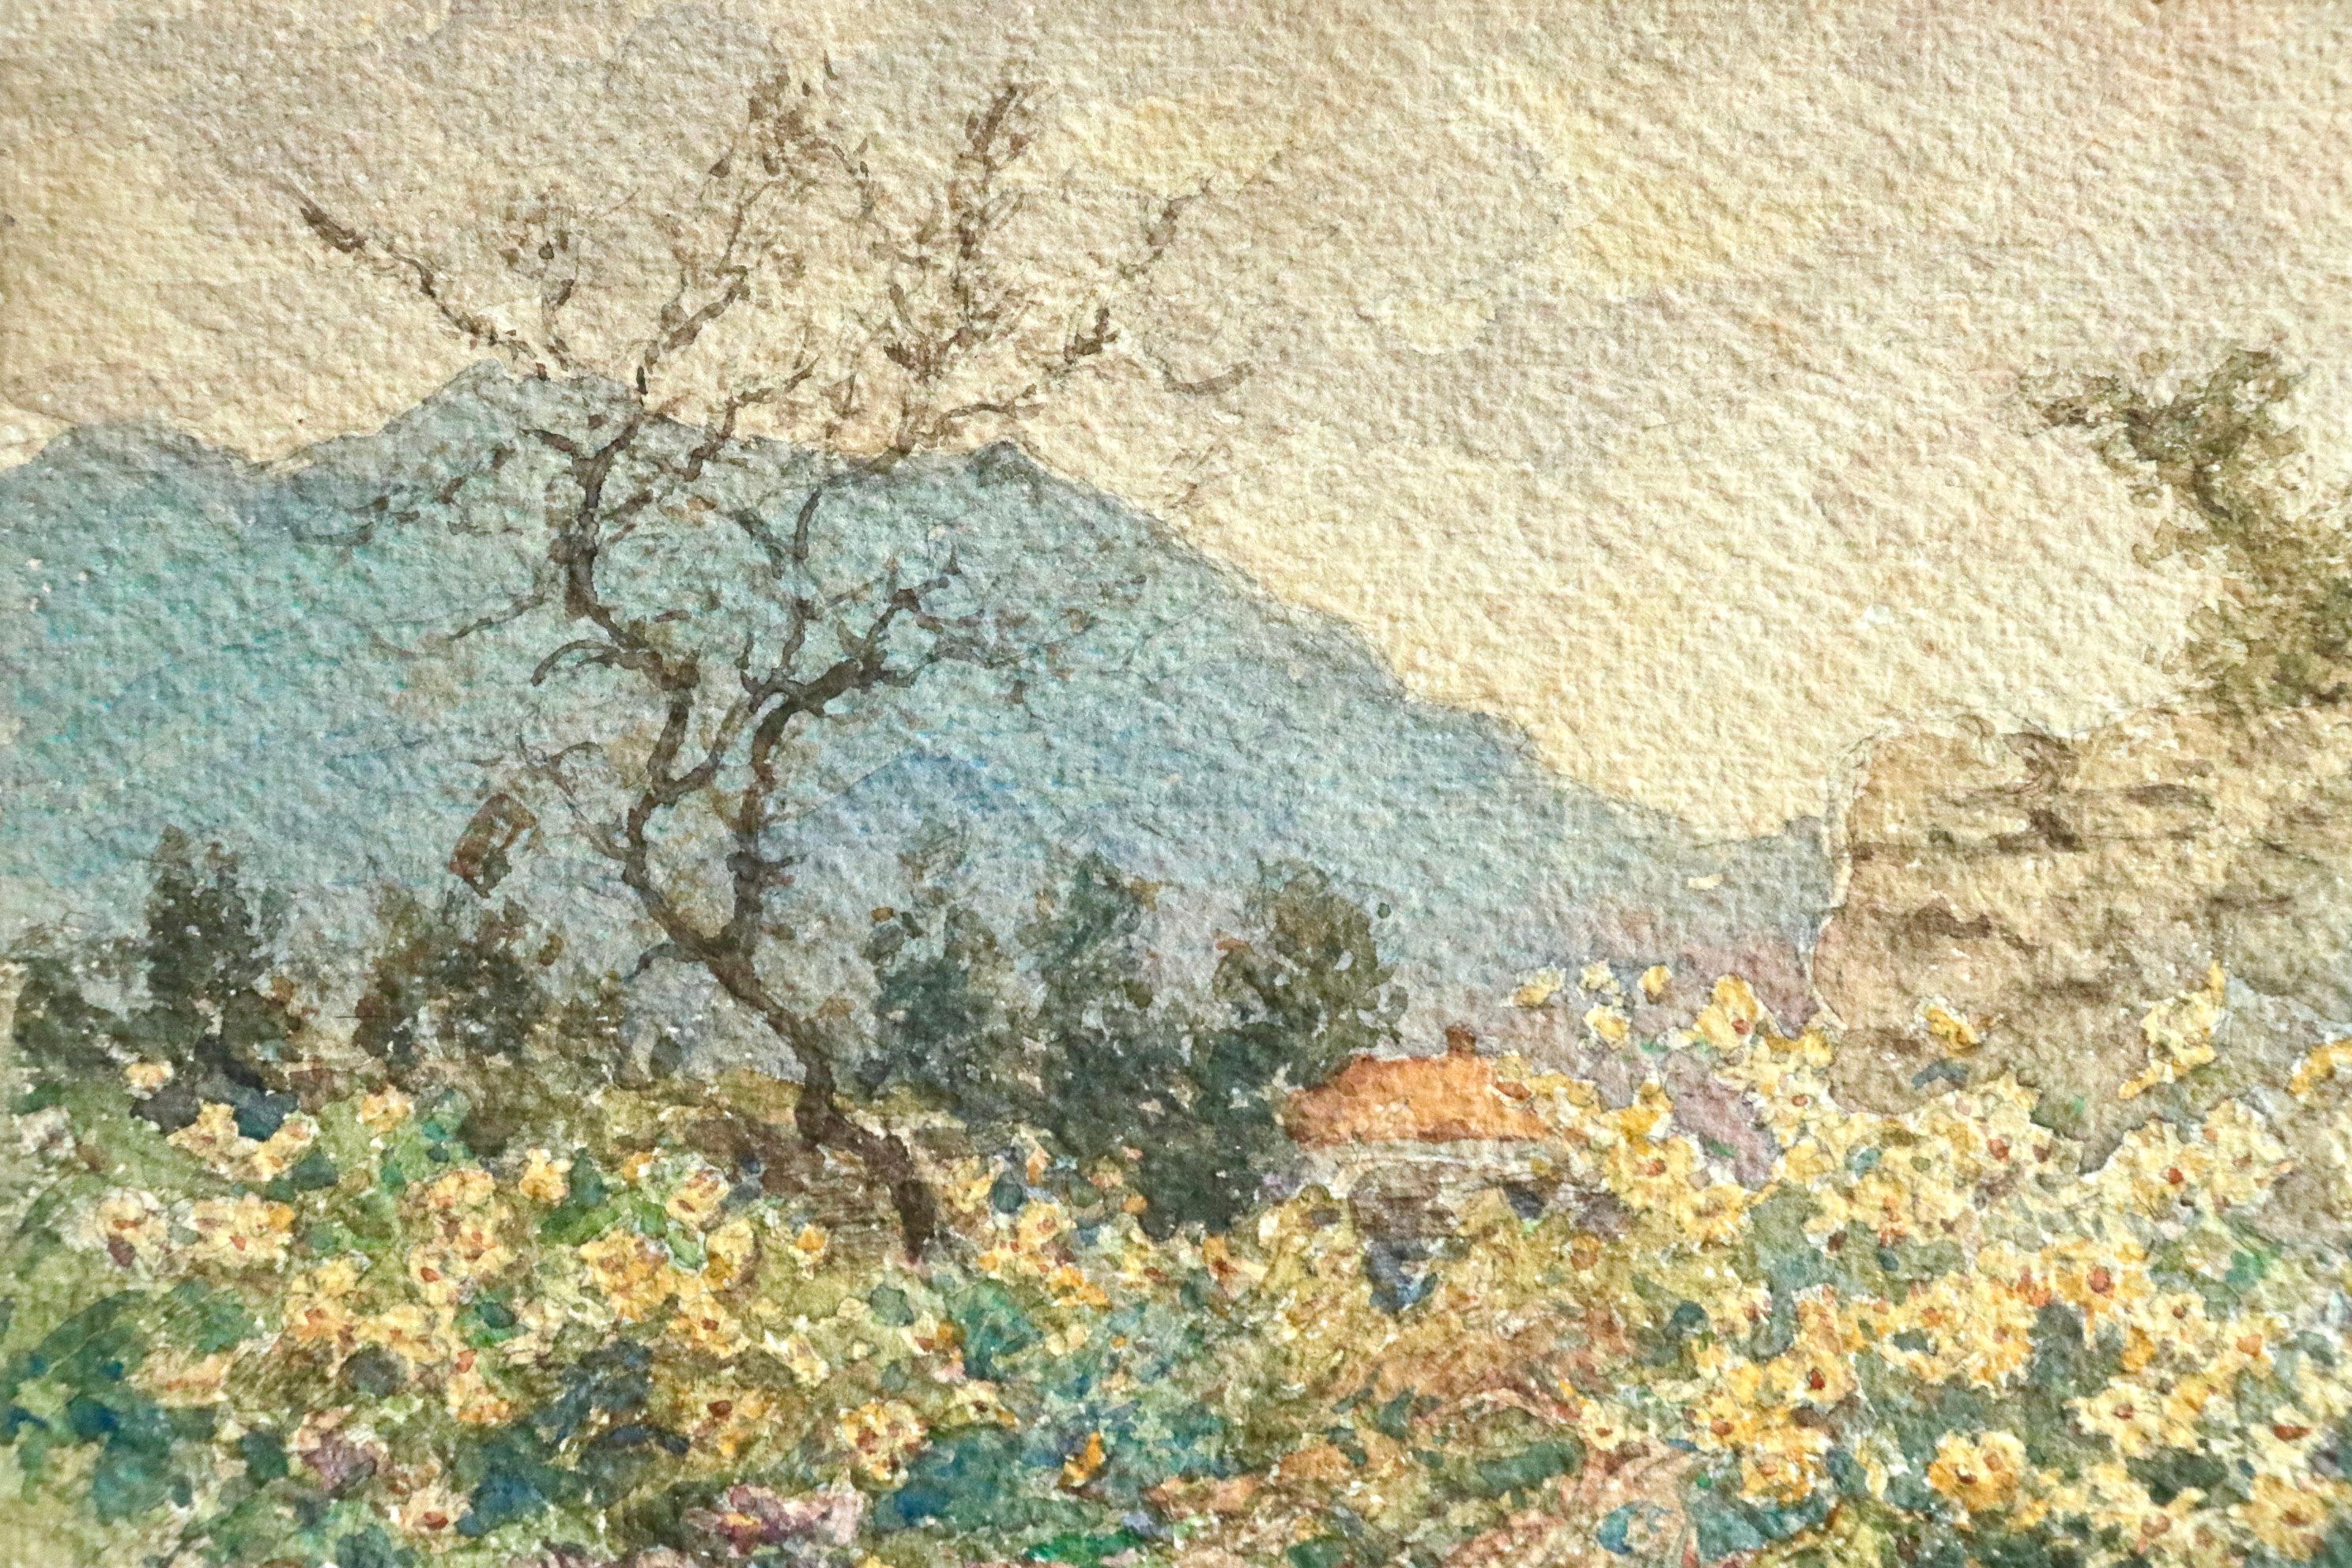 A beautiful watercolour on paper circa 1910 by Henri Duhem depicting an autumn landscape - with a path weaving through broken fences, yellow flowers and a bare tree, with a cottage in the distance and a view of the mountains beyond.